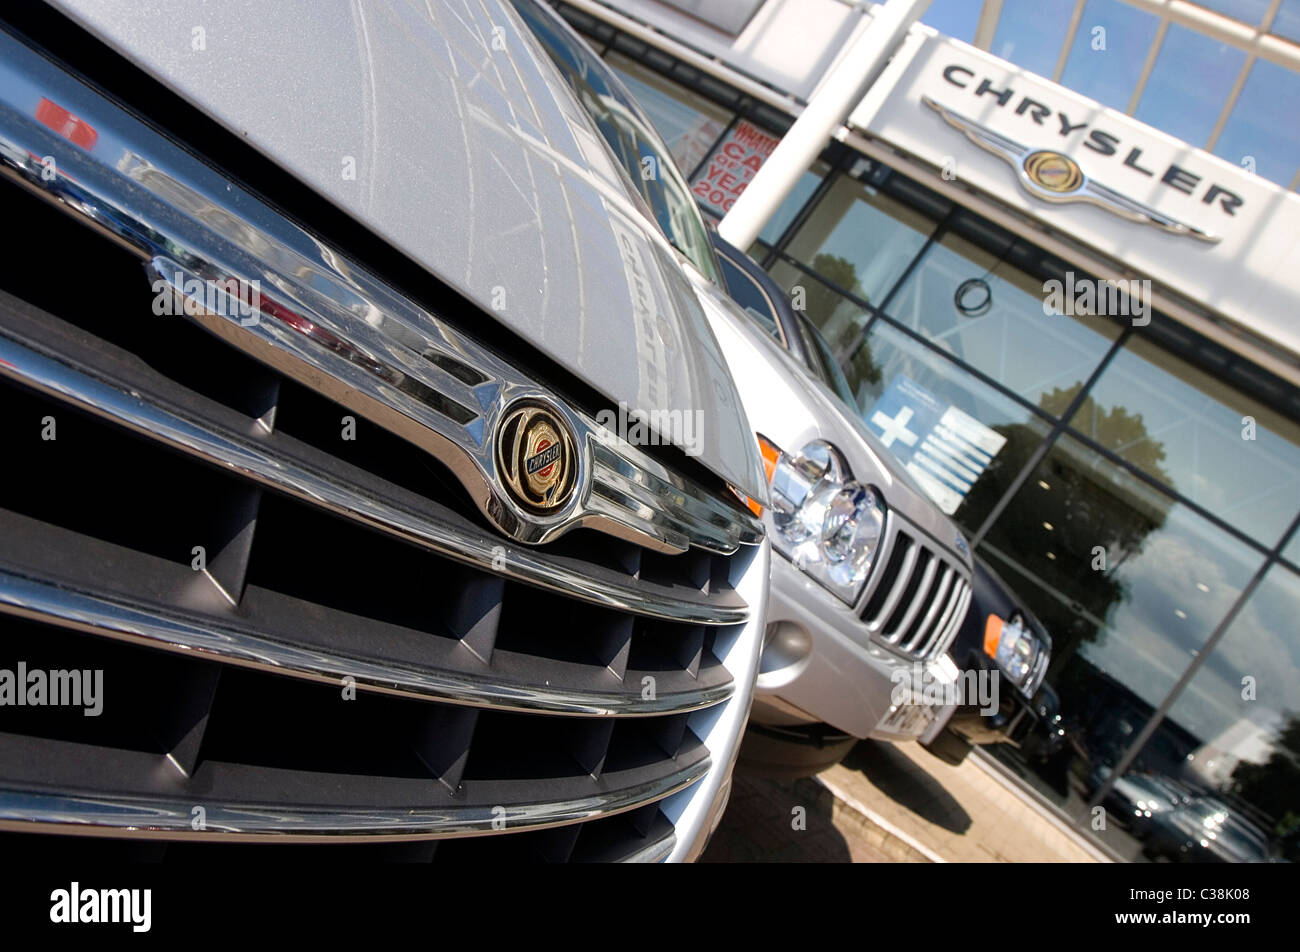 Chrysler cars for sale at a dealership. Stock Photo